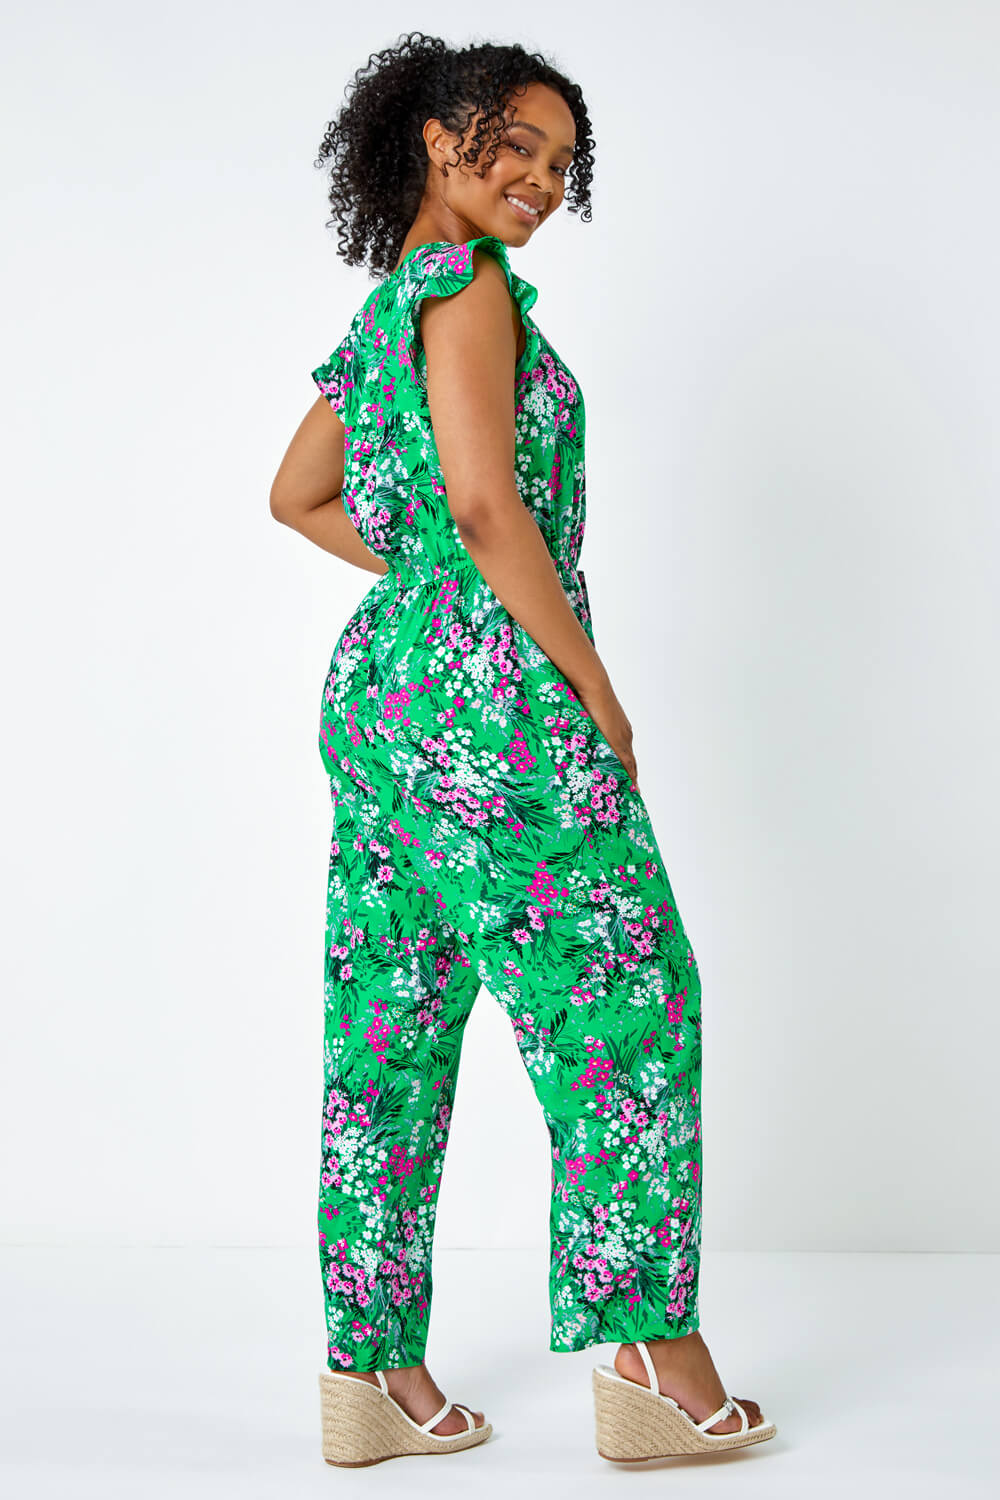 Green Petite Ditsy Floral Stretch Jumpsuit, Image 3 of 5